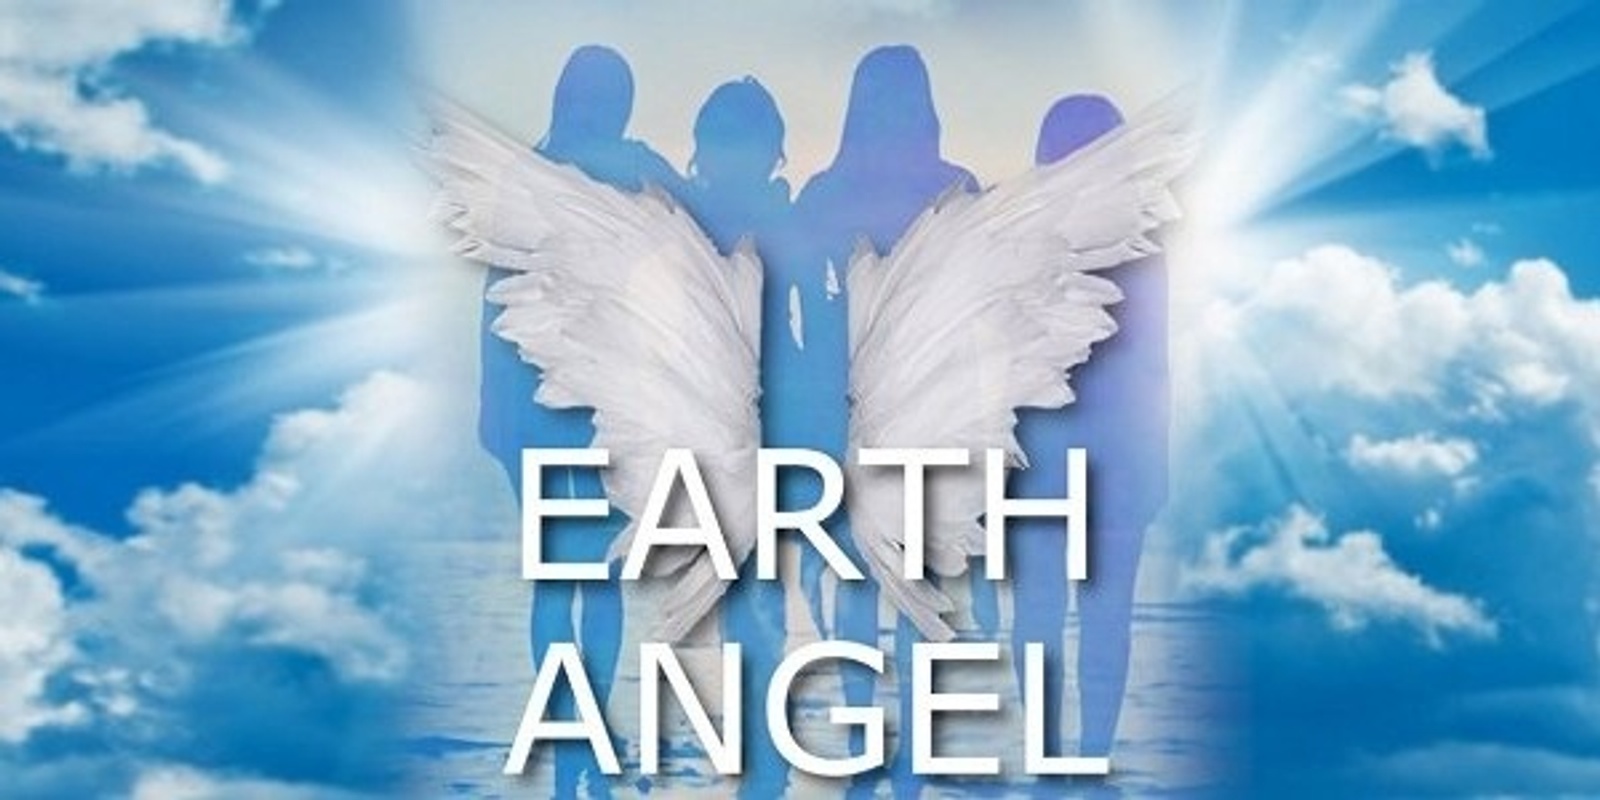 Earth Angel Collective Healer APPRENTICESHIP ~ ONLINE + IN PERSON